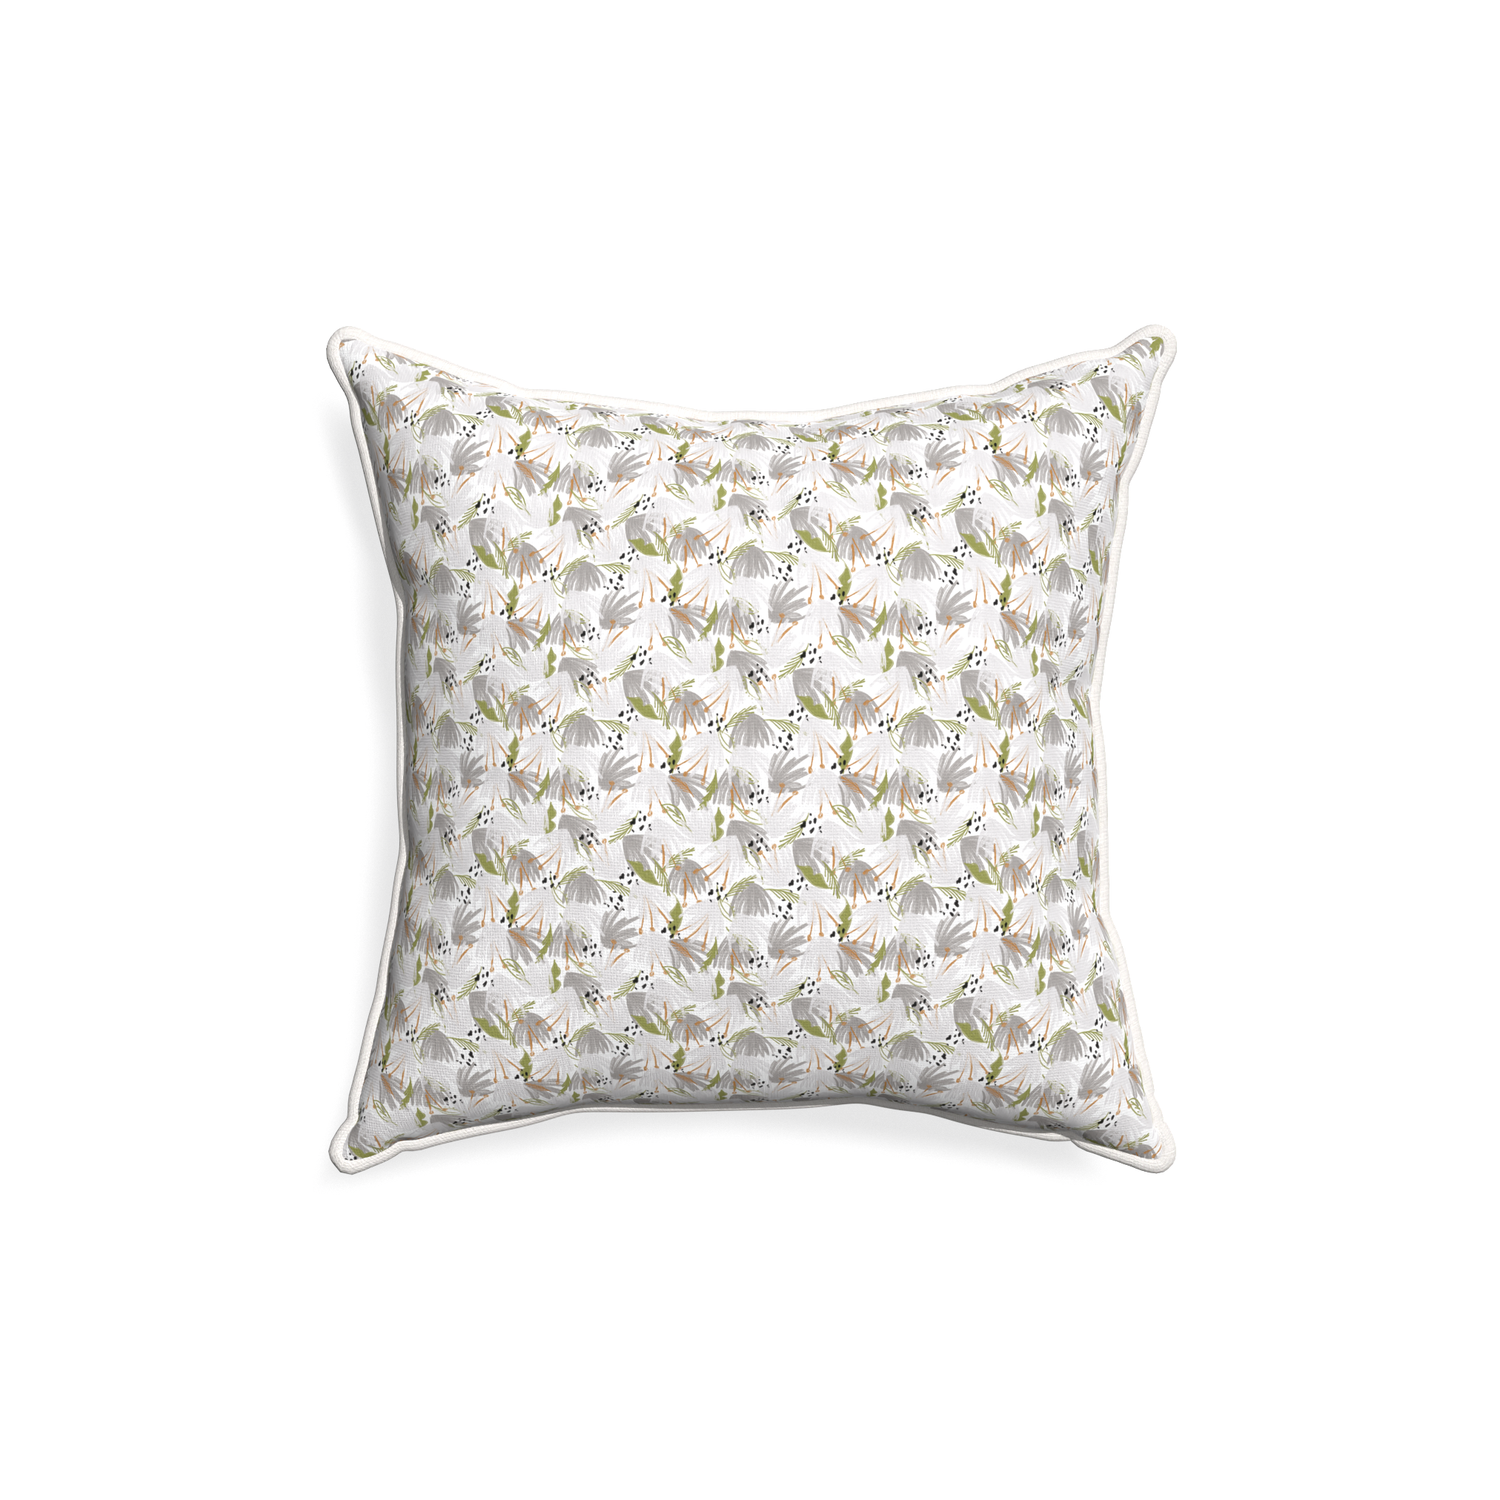 18-square eden grey custom pillow with snow piping on white background